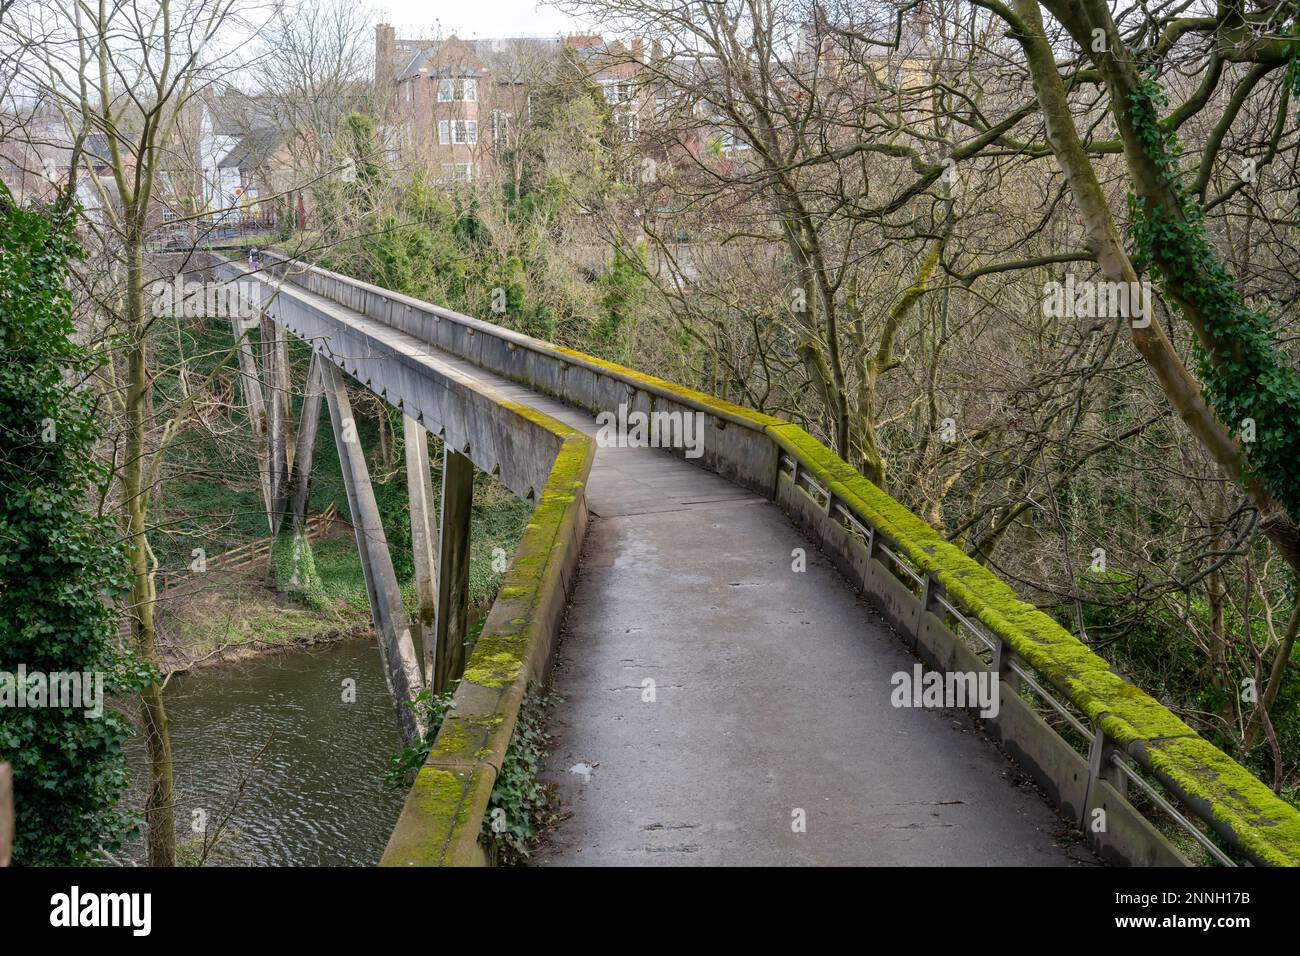 Award winning Grade I listed Kingsgate Footbridge over the River Wear in the city of Durham, UK, designed by architect Ove Arup in 1963. Stock Photo